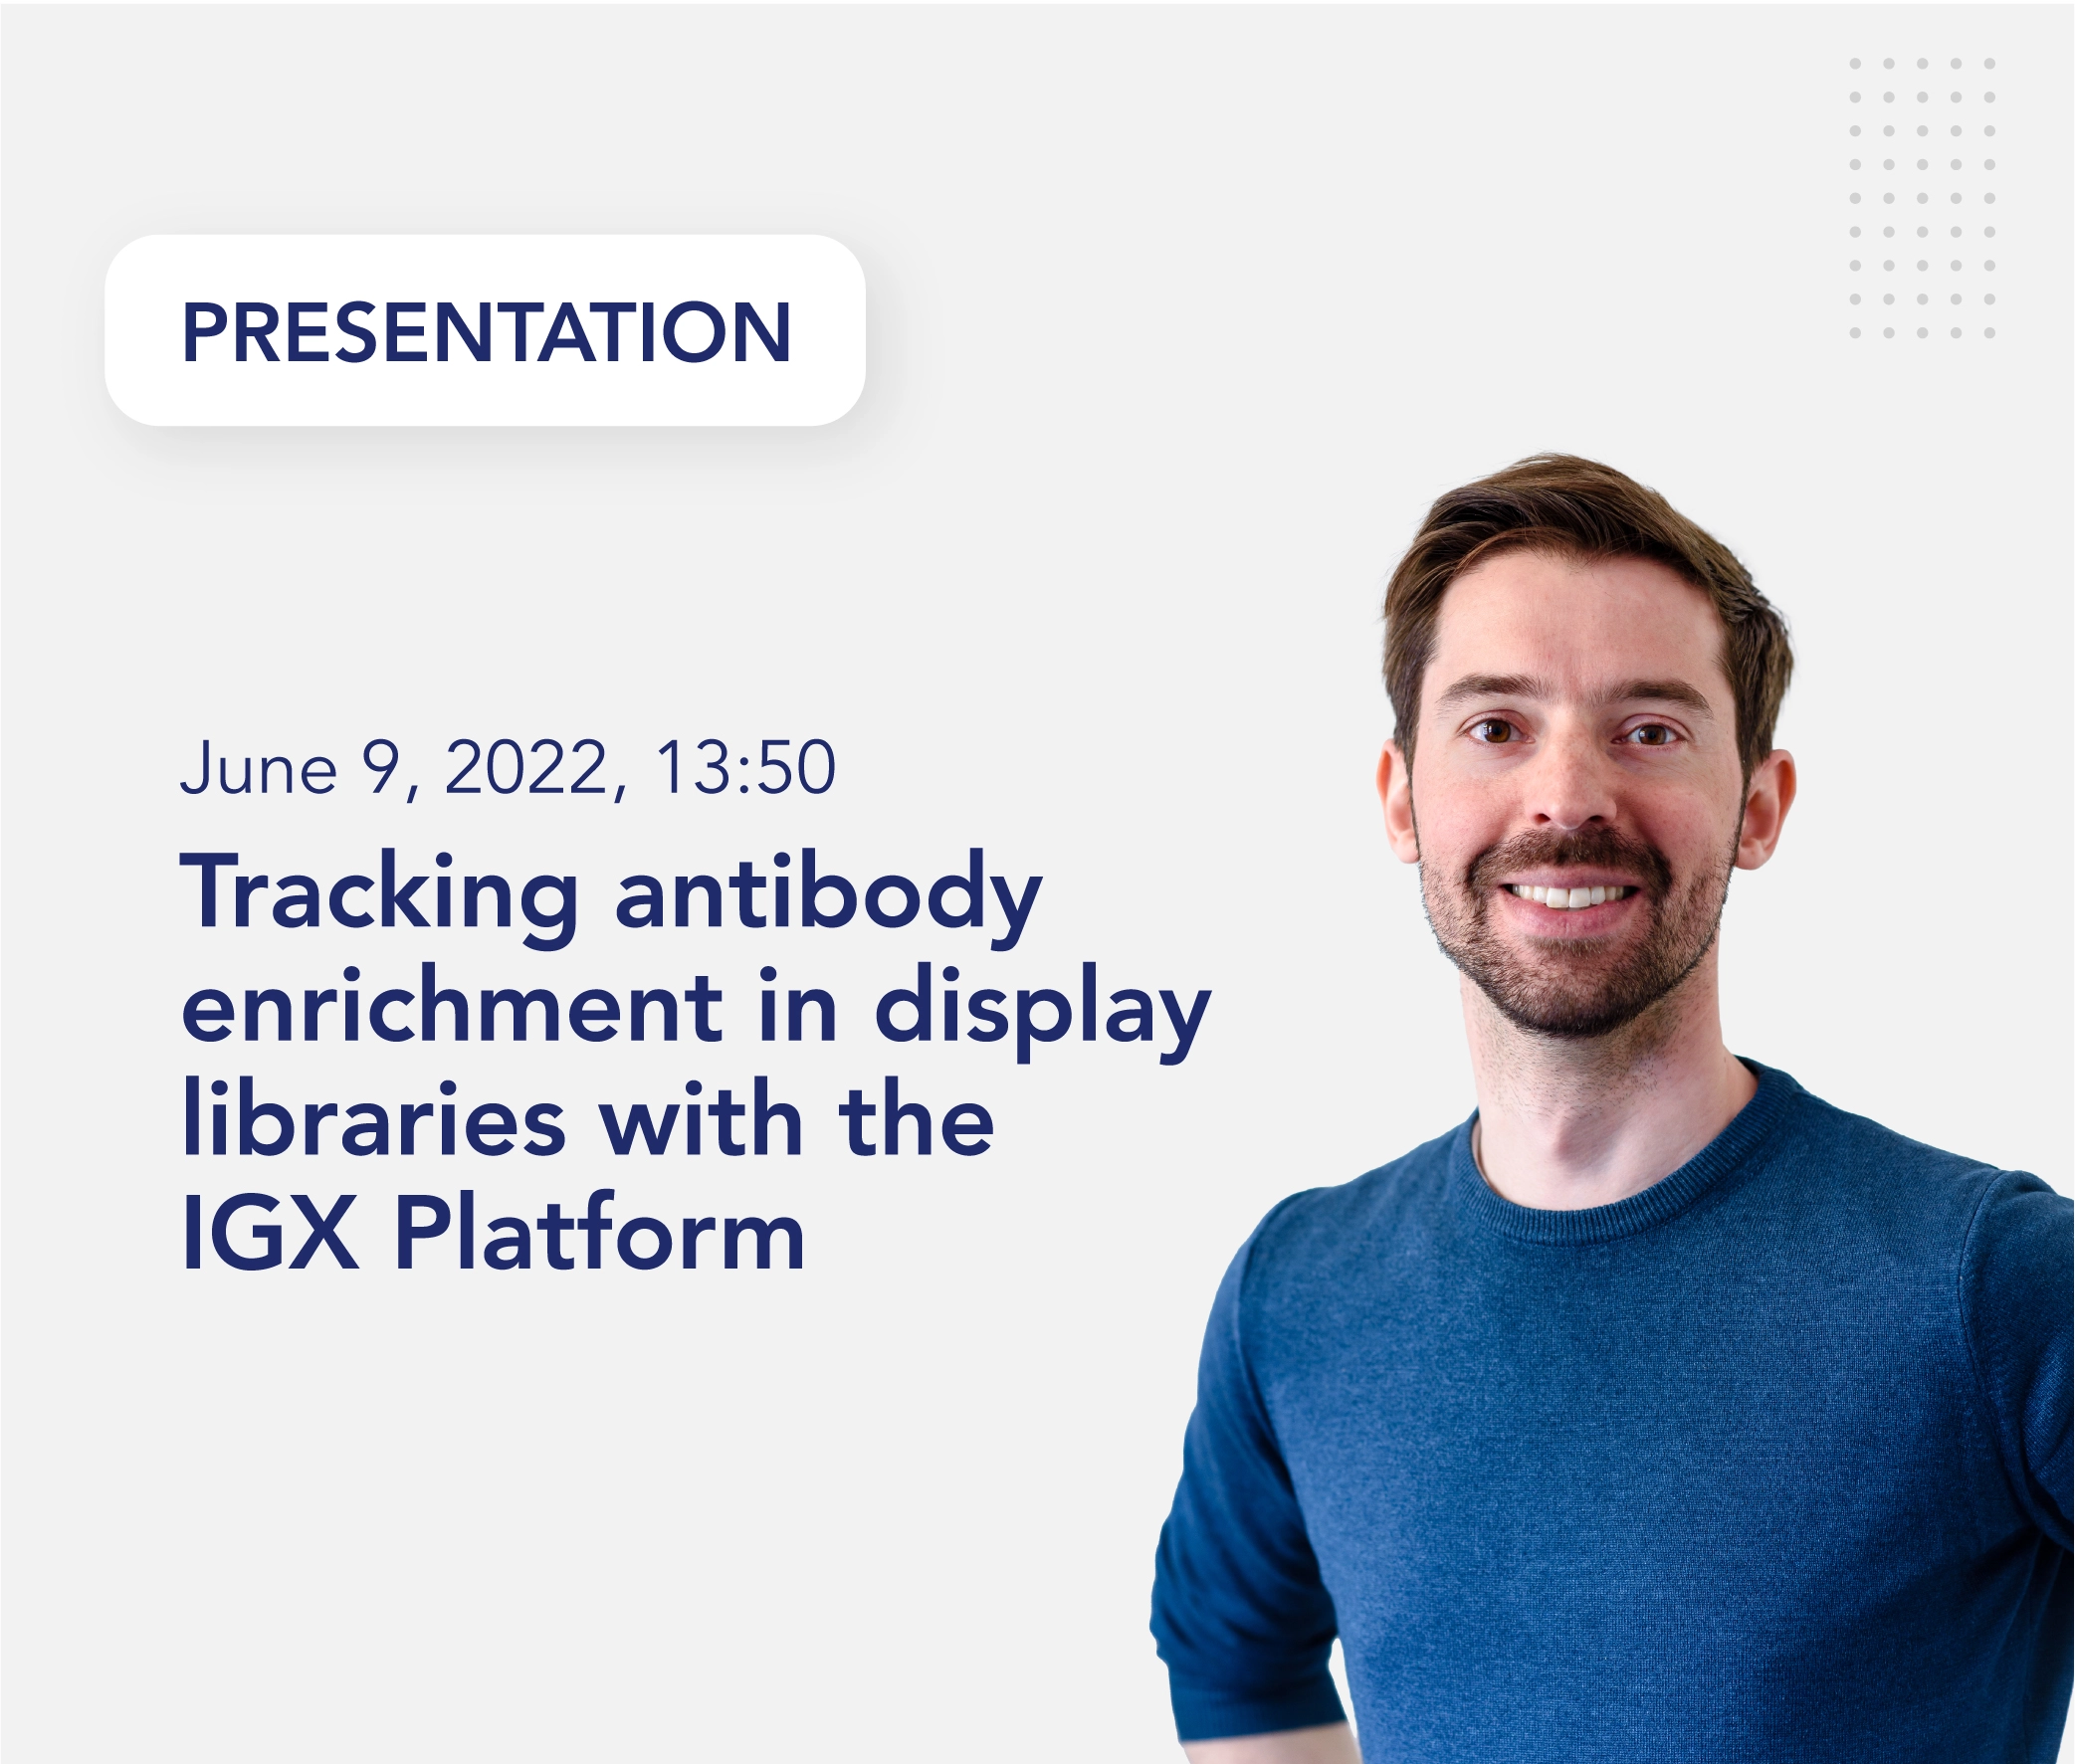 Presentation "Tracking antibody enrichment in display libraries with the IGX Platform" on June 9th 2022 at 13:50 by Lorenzo Fanchi.